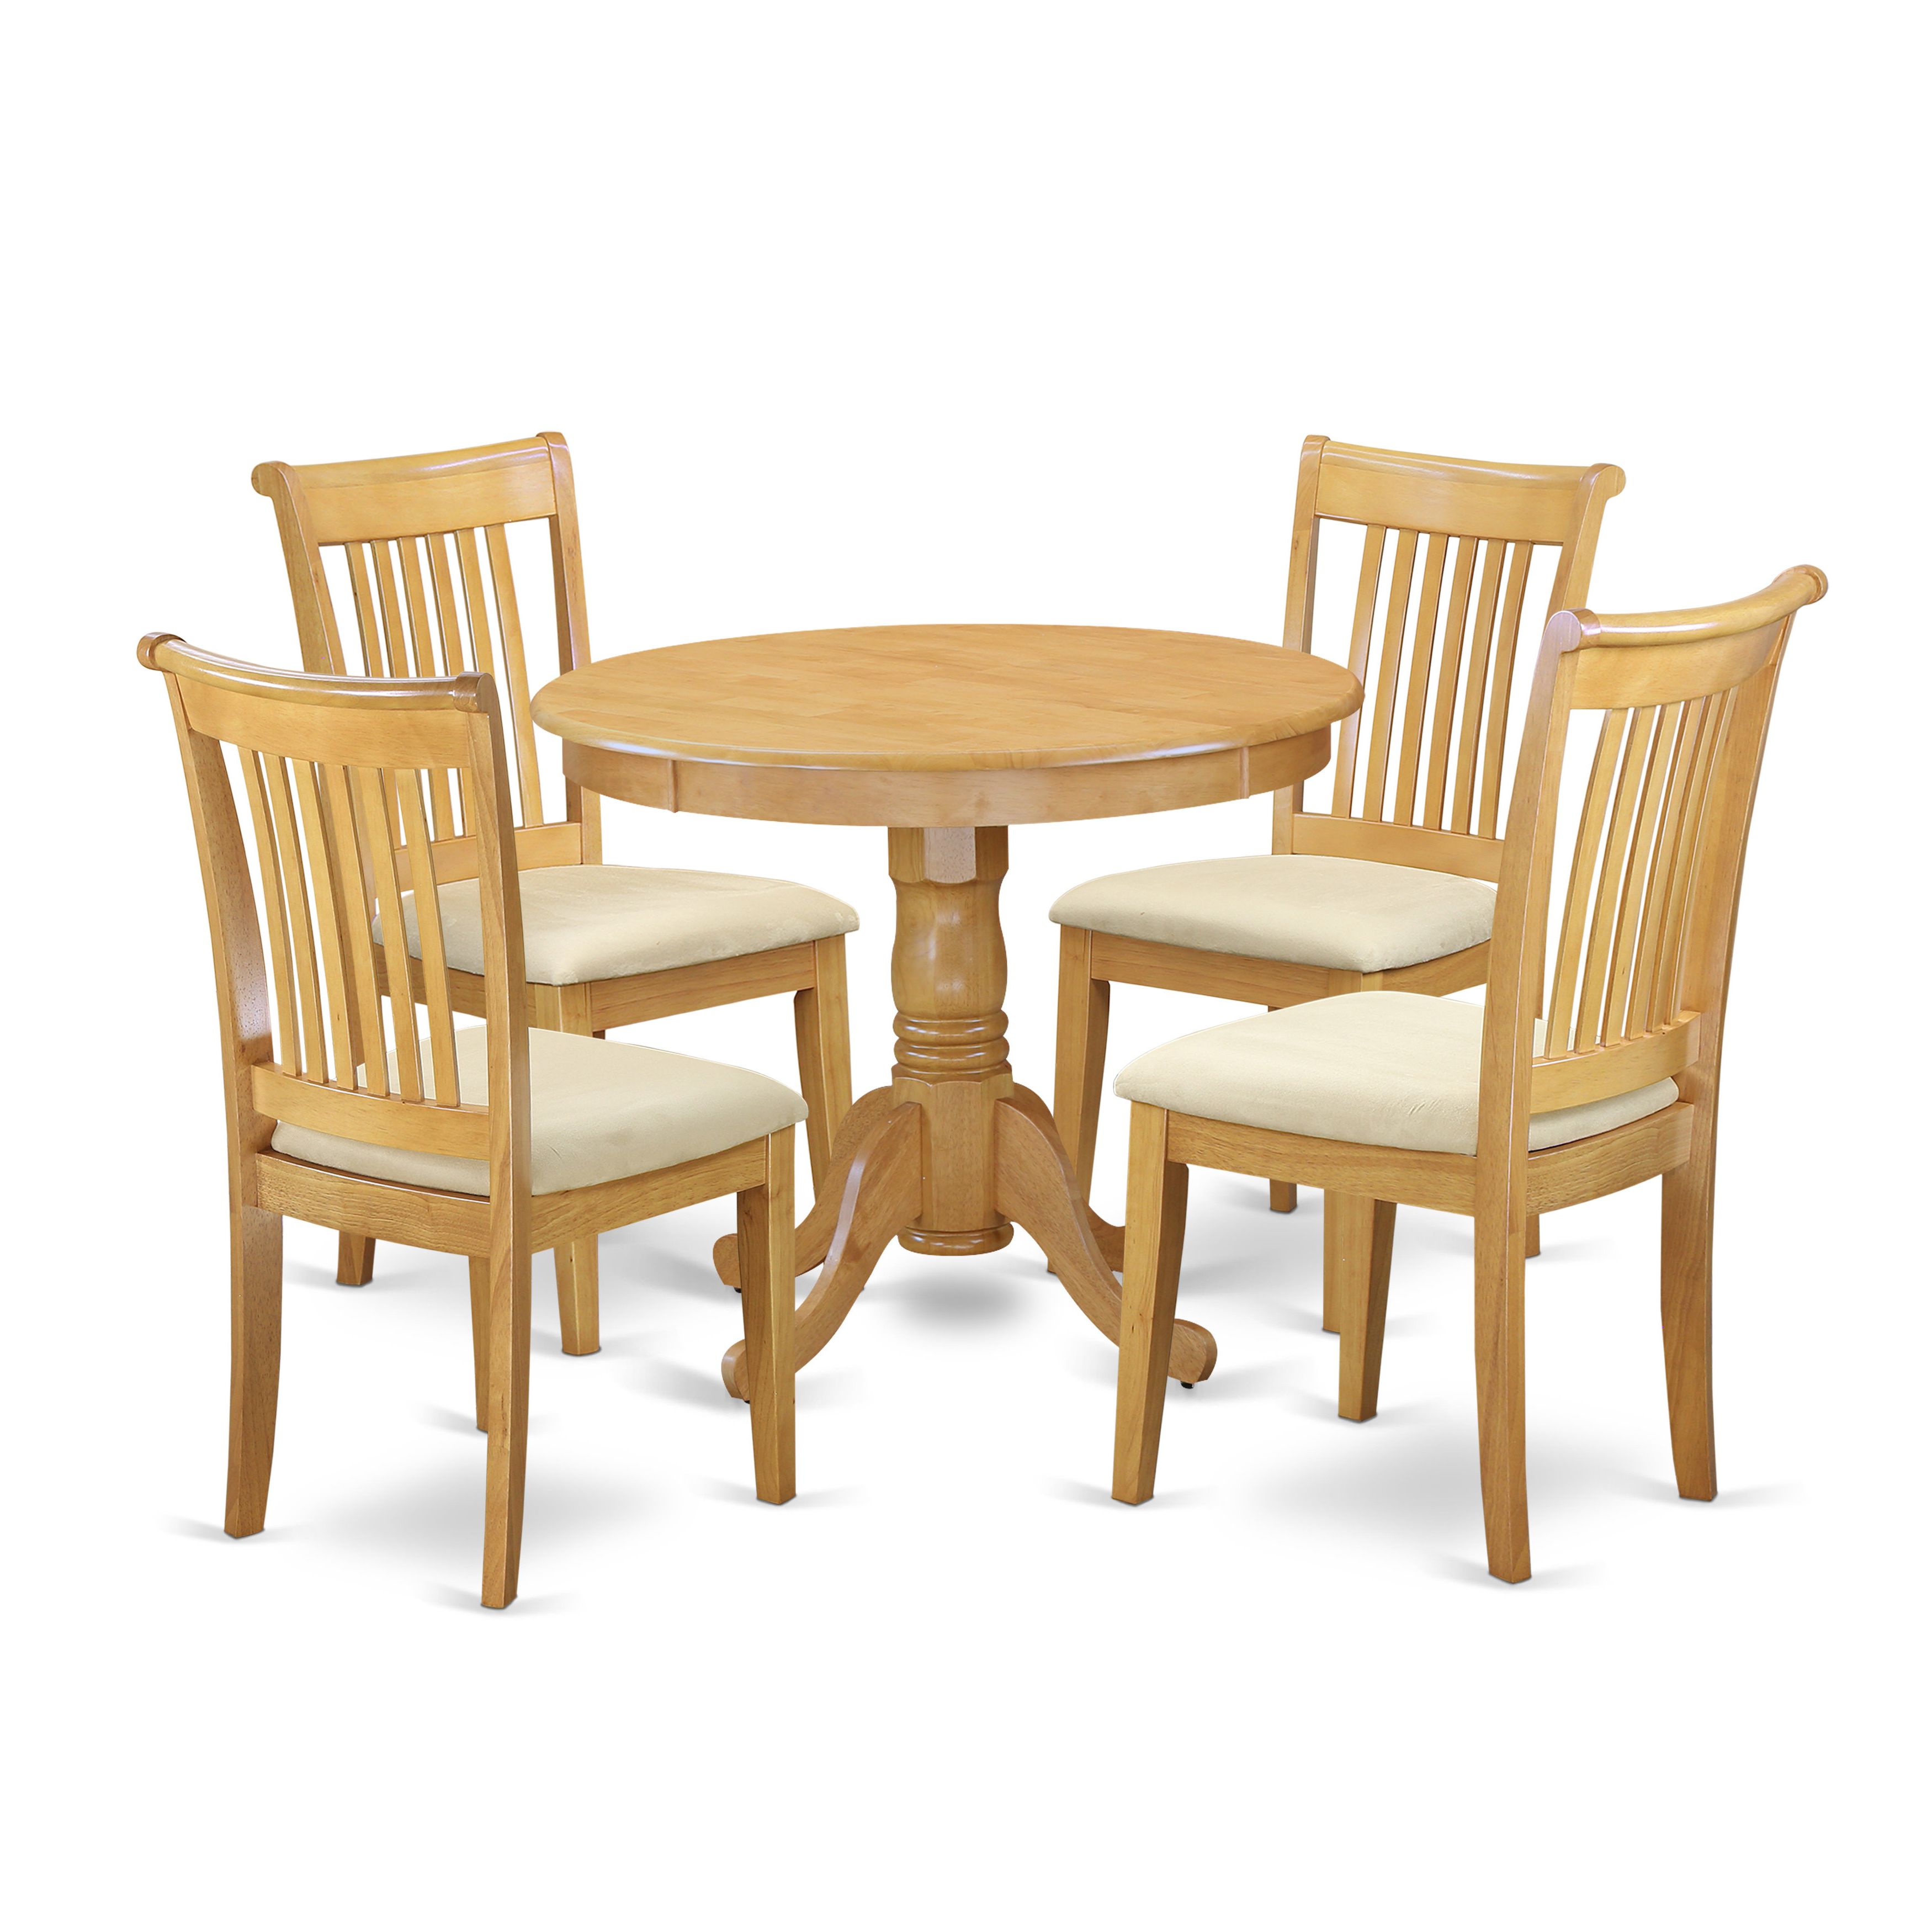 Wayfair Pertaining To Trendy 5 Piece Breakfast Nook Dining Sets (View 12 of 25)